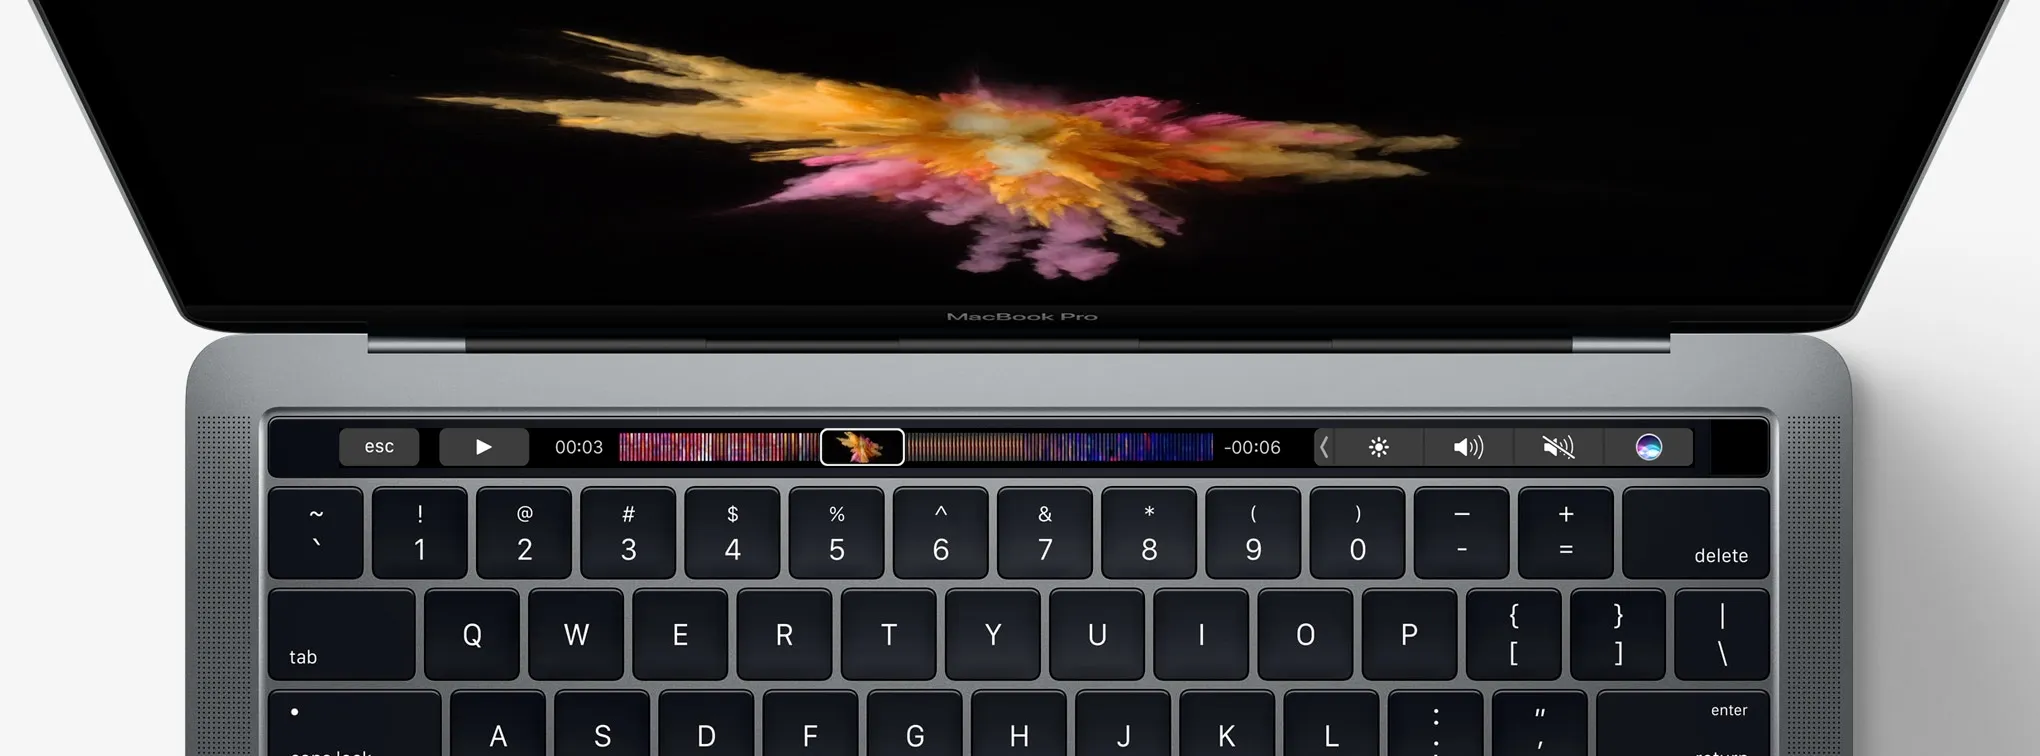 A Macbook Pro with Touch Bar